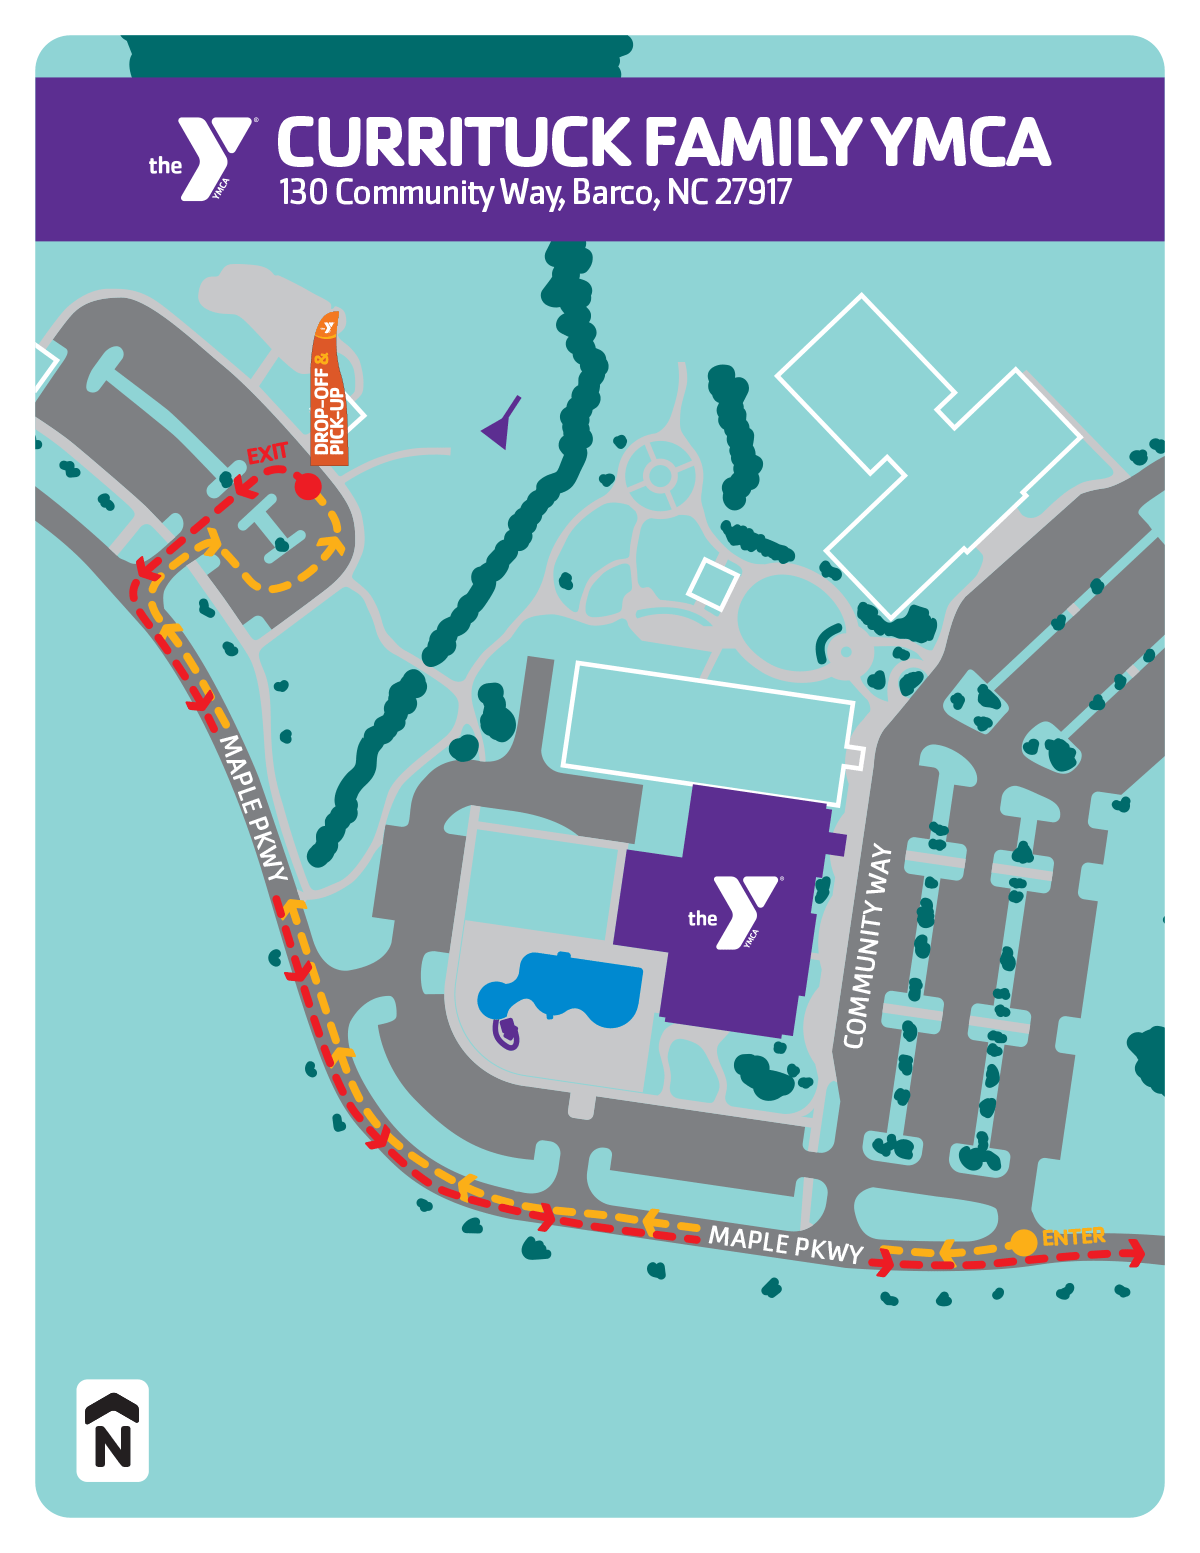 Summer camp drop-off & pick-up locations for the Currituck Family YMCA